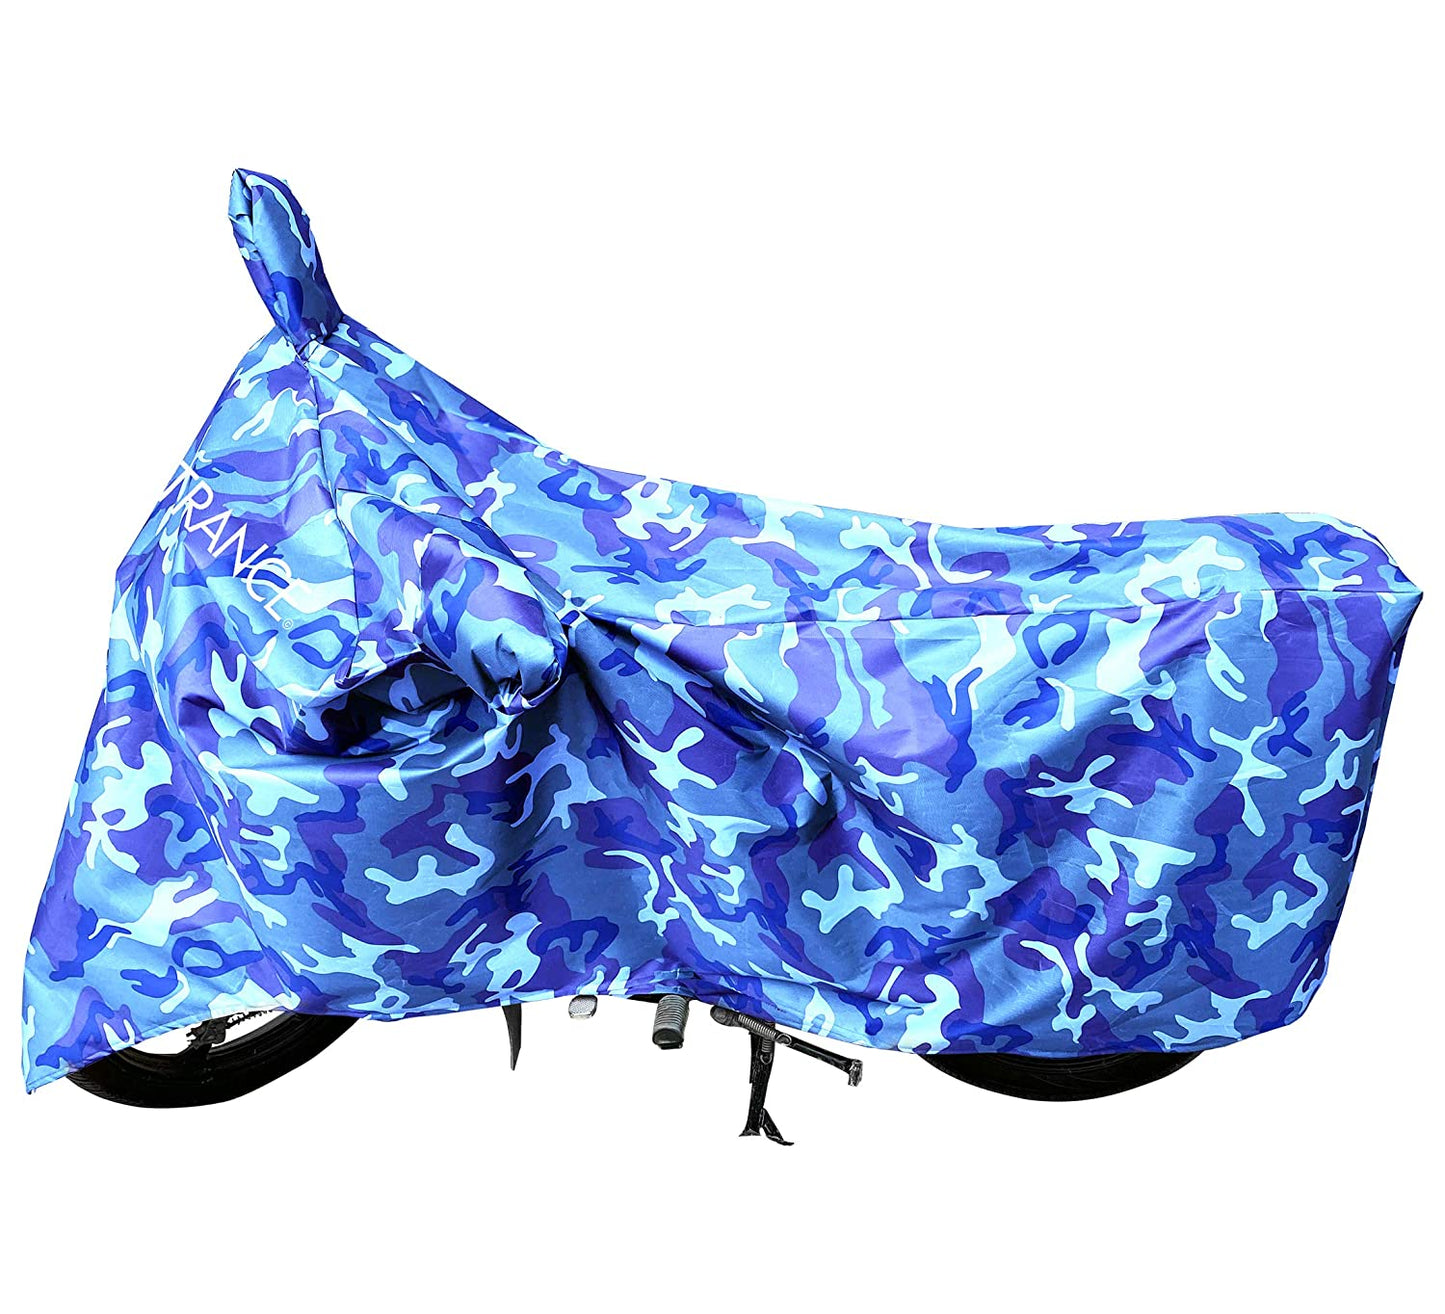 MotoTrance Jungle Bike Body Covers For Hero Splendor Pro Classic - Interlock-Stitched Waterproof and Heat Resistant with Mirror Pockets